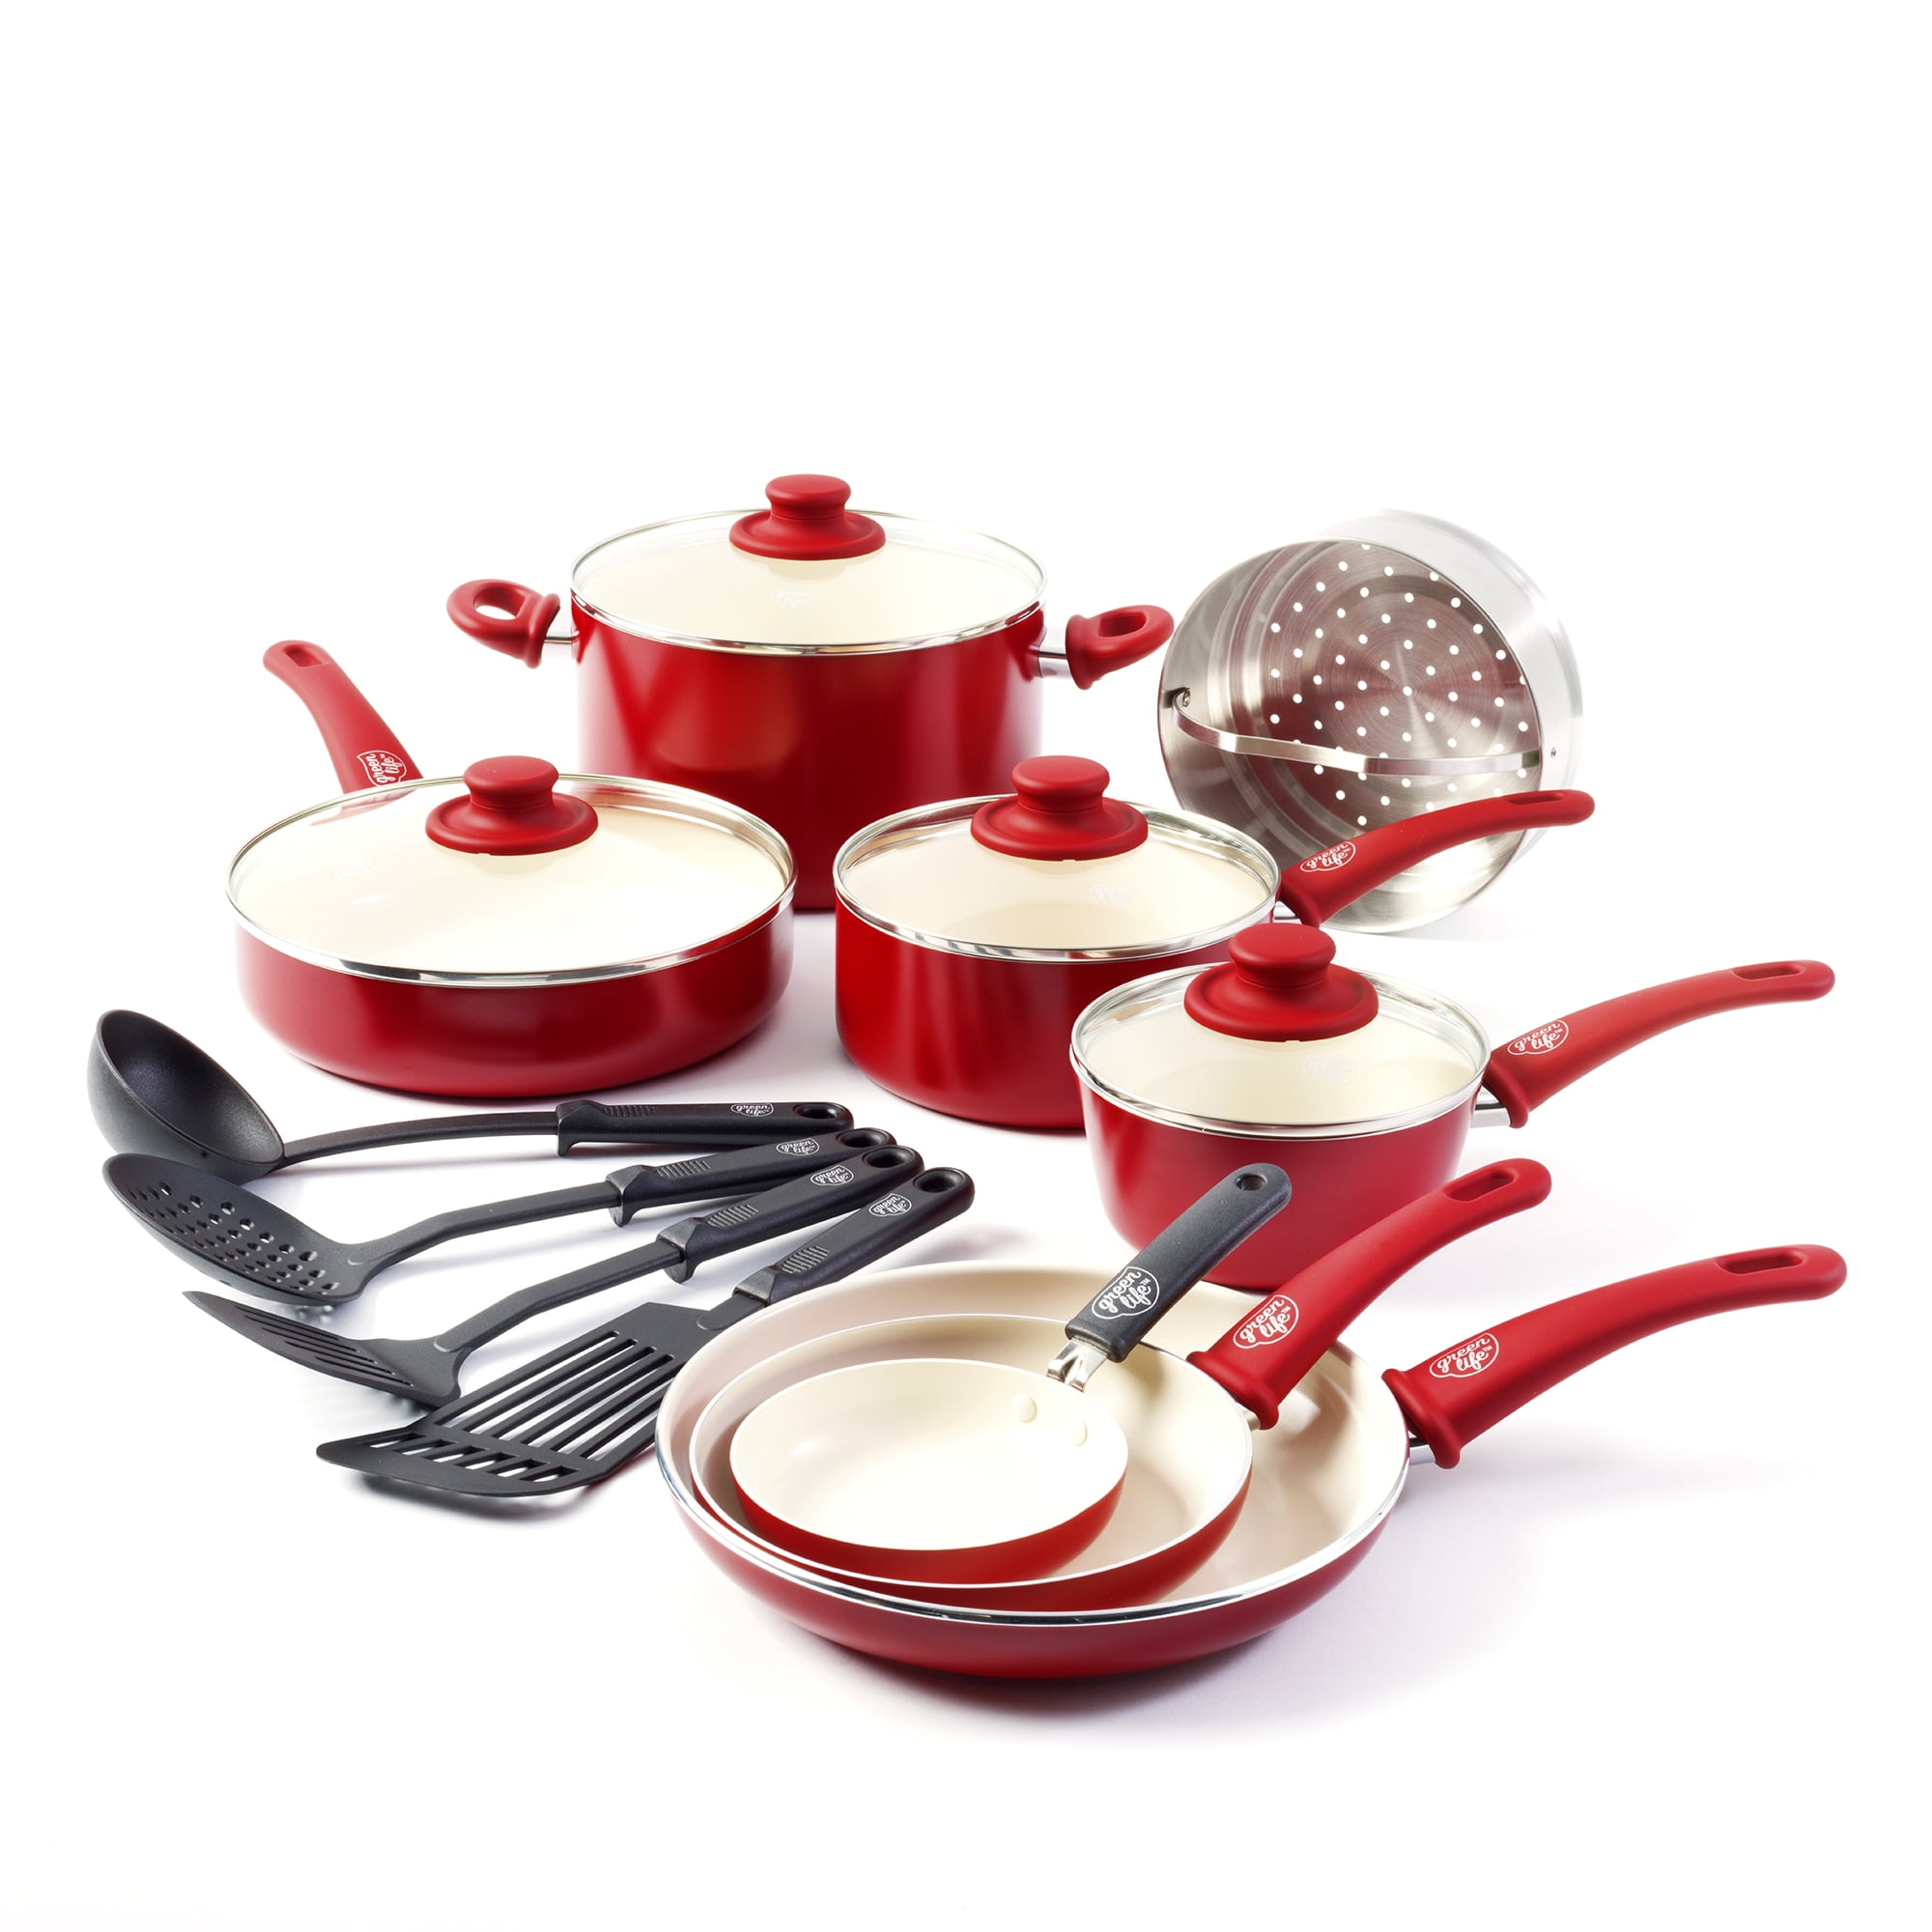 GreenLife 18-Piece Soft Grip Toxin-Free Healthy Ceramic Non-stick 